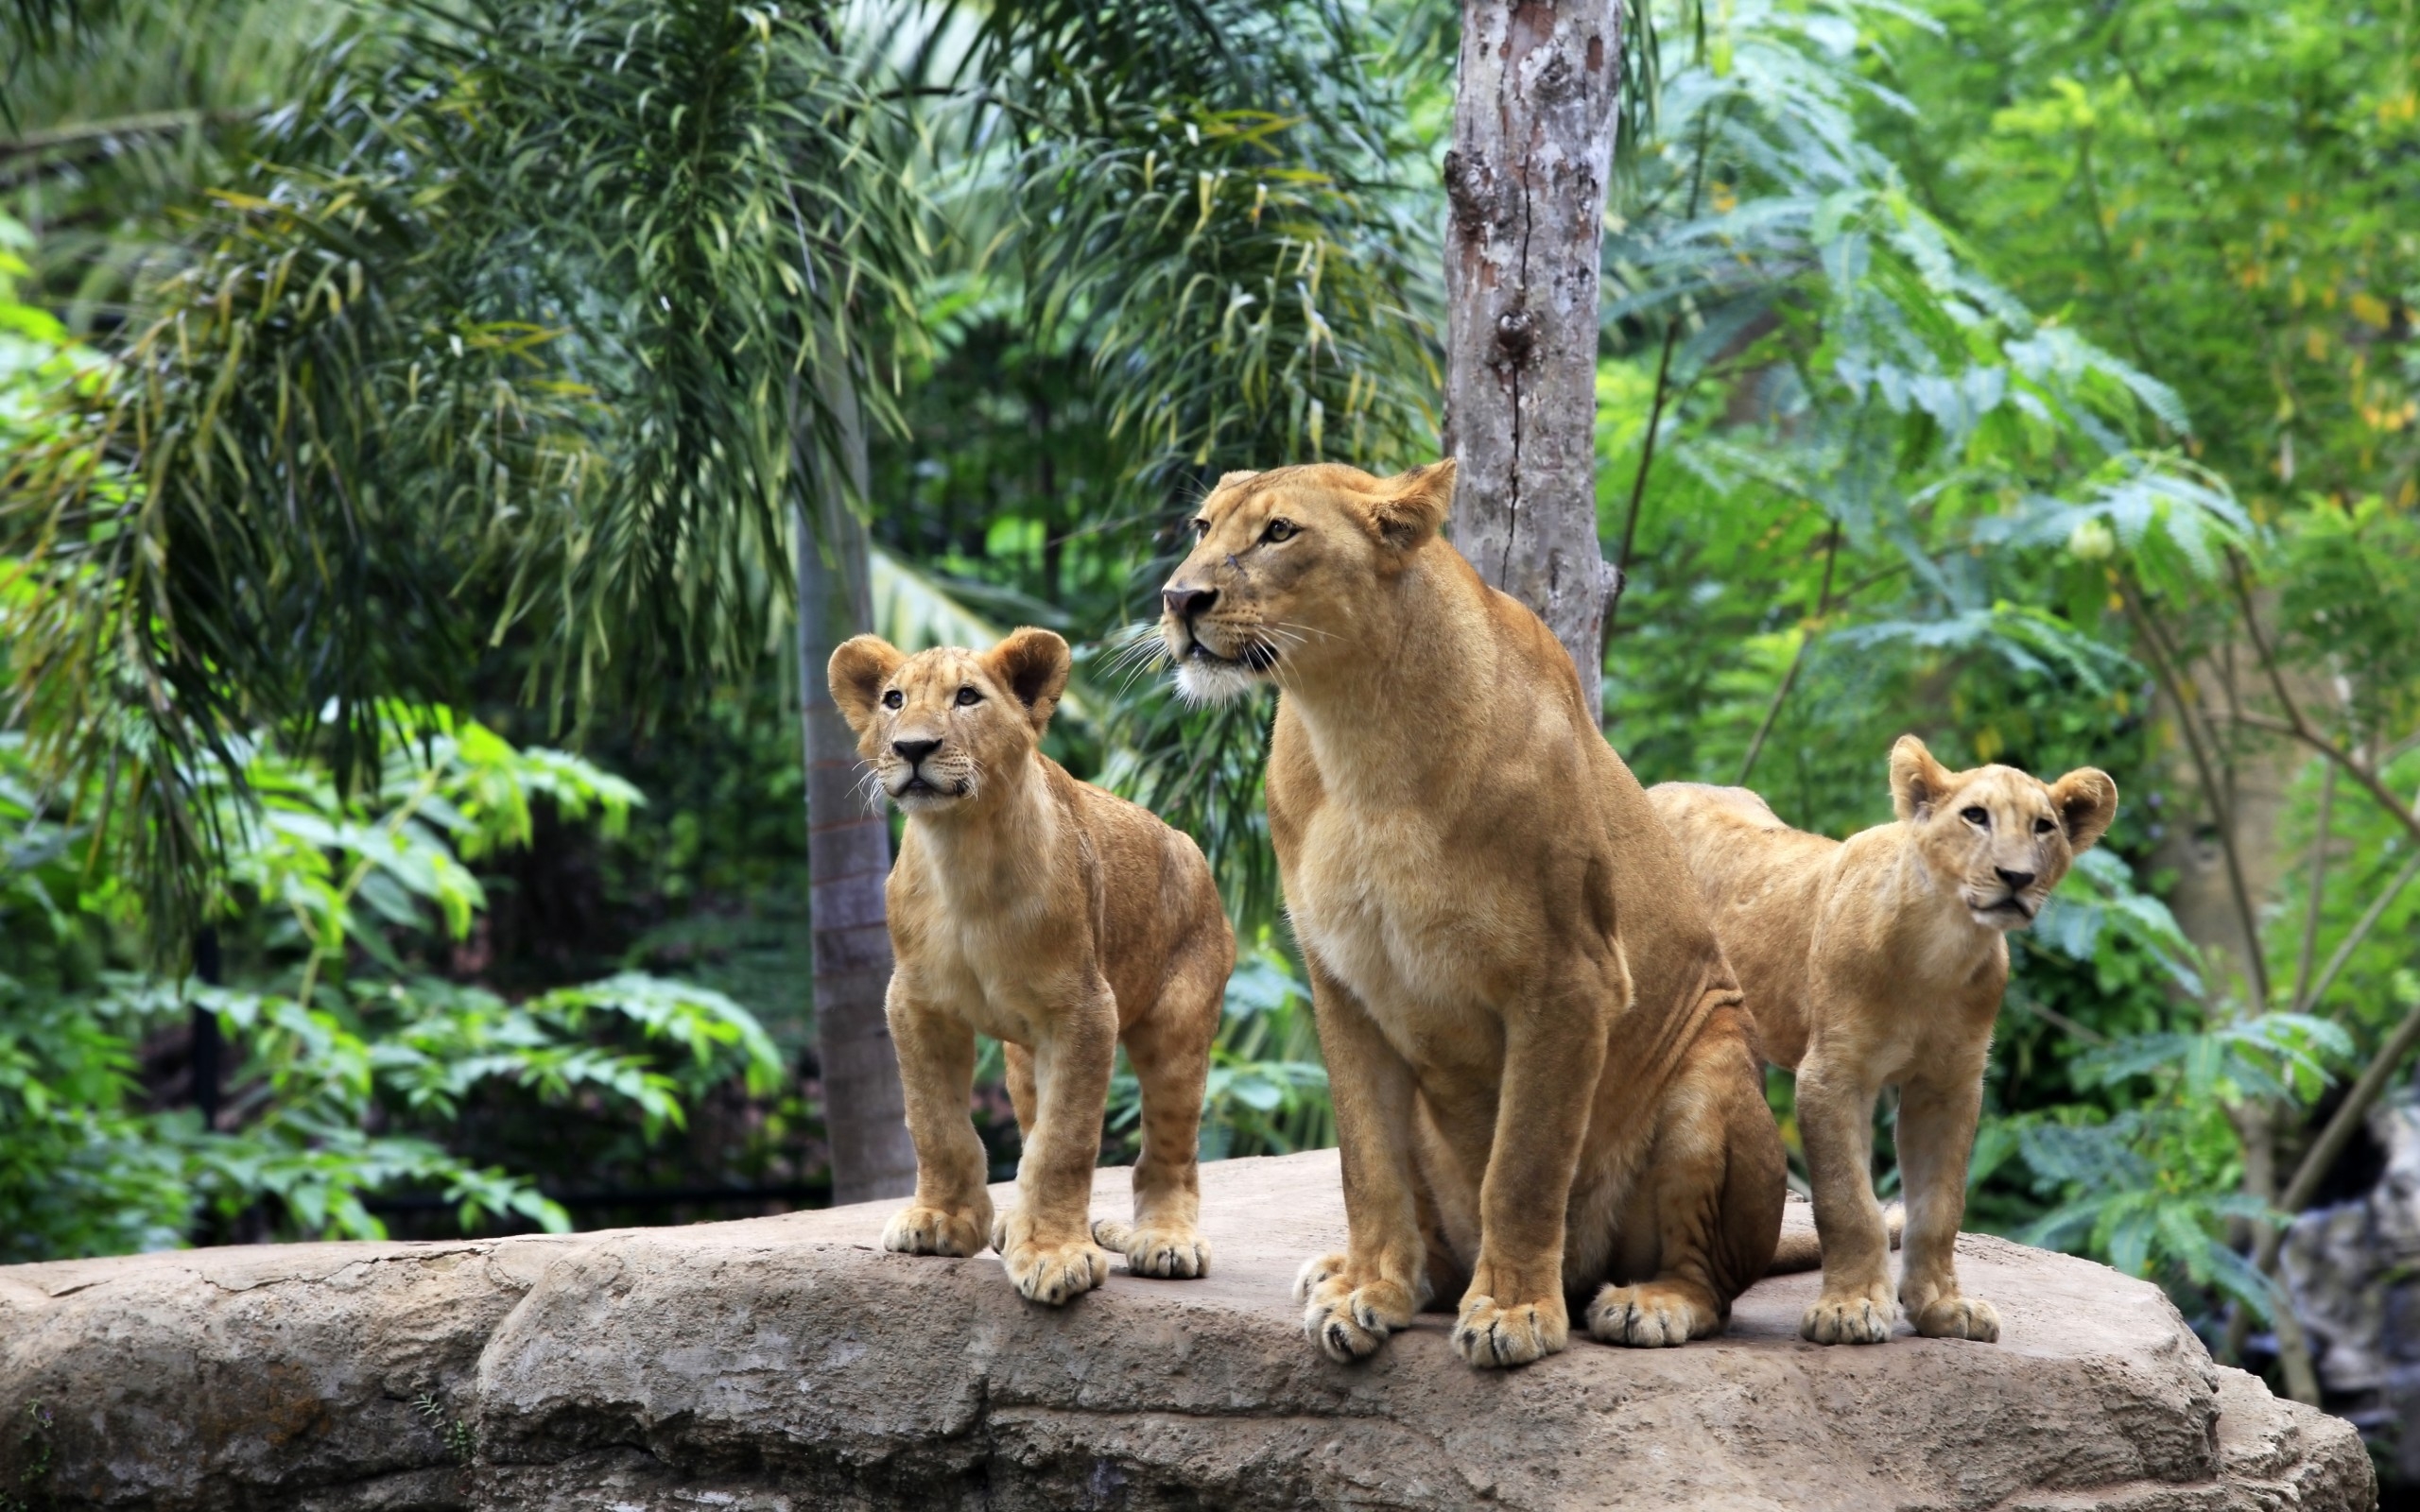 A lioness with two lion cubs